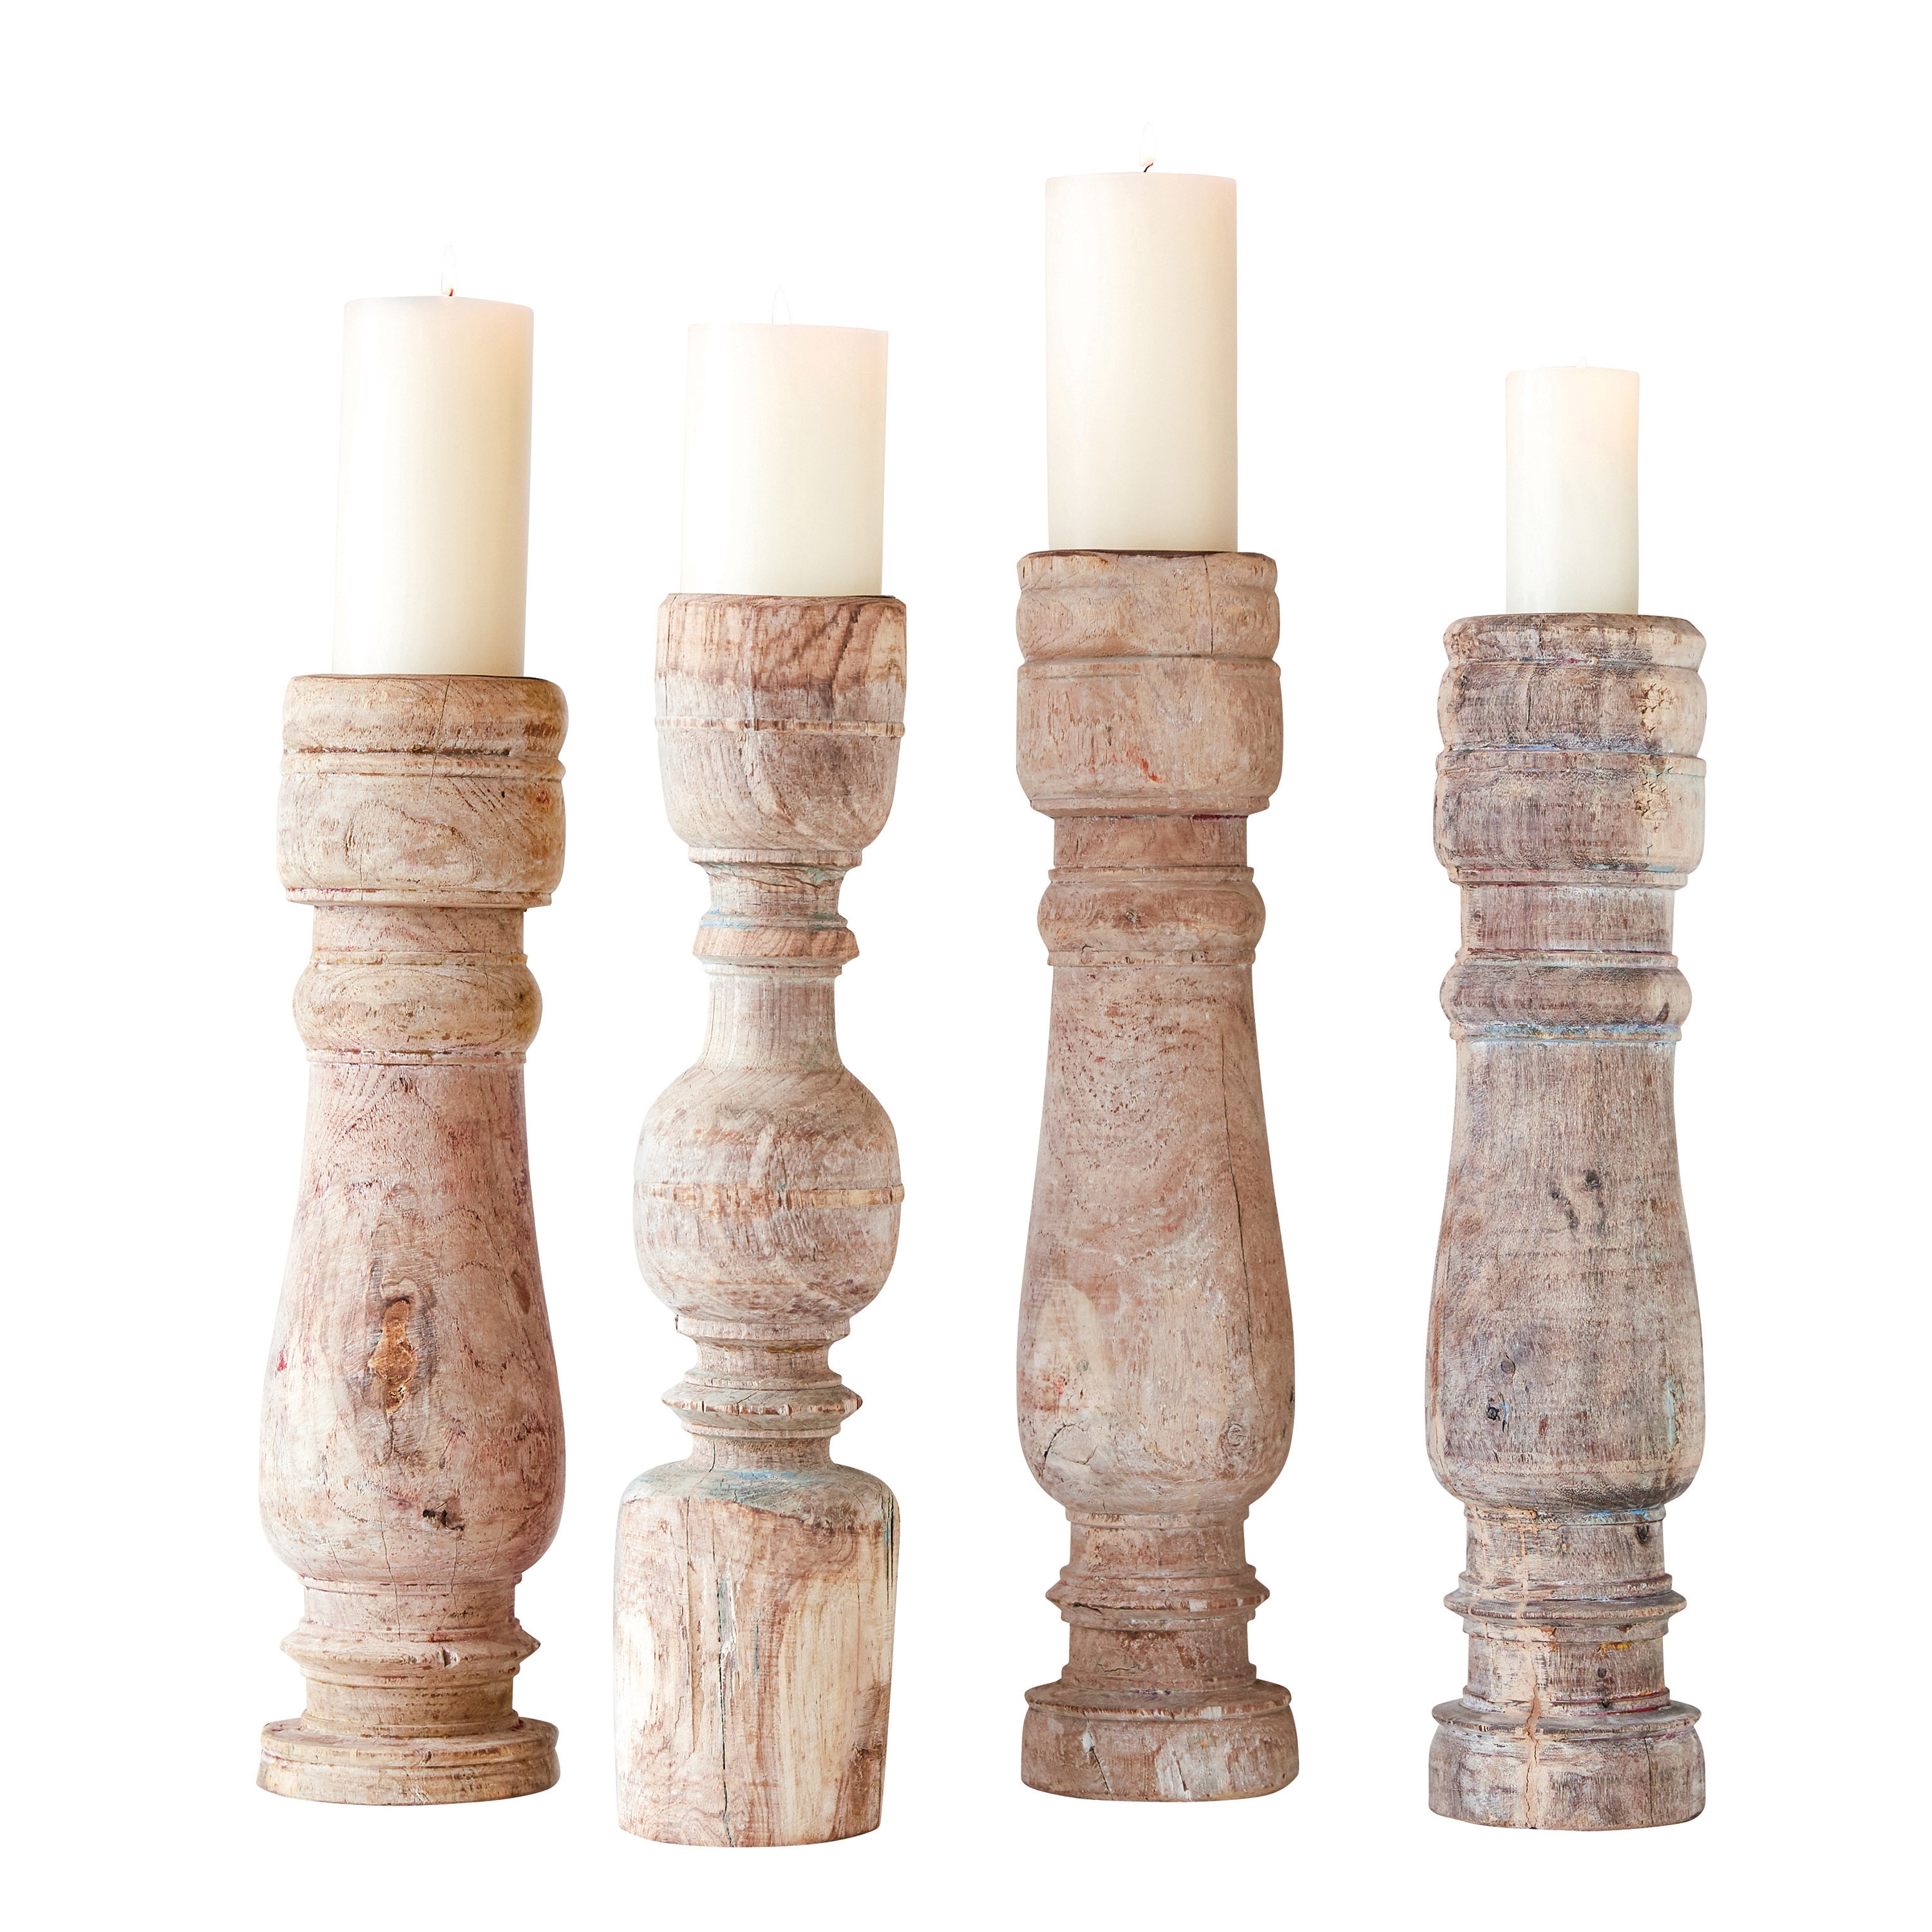 Kamiyah Found Candleholder (Includes 1 Candle Holder, Each One Will Vary) - Image 1